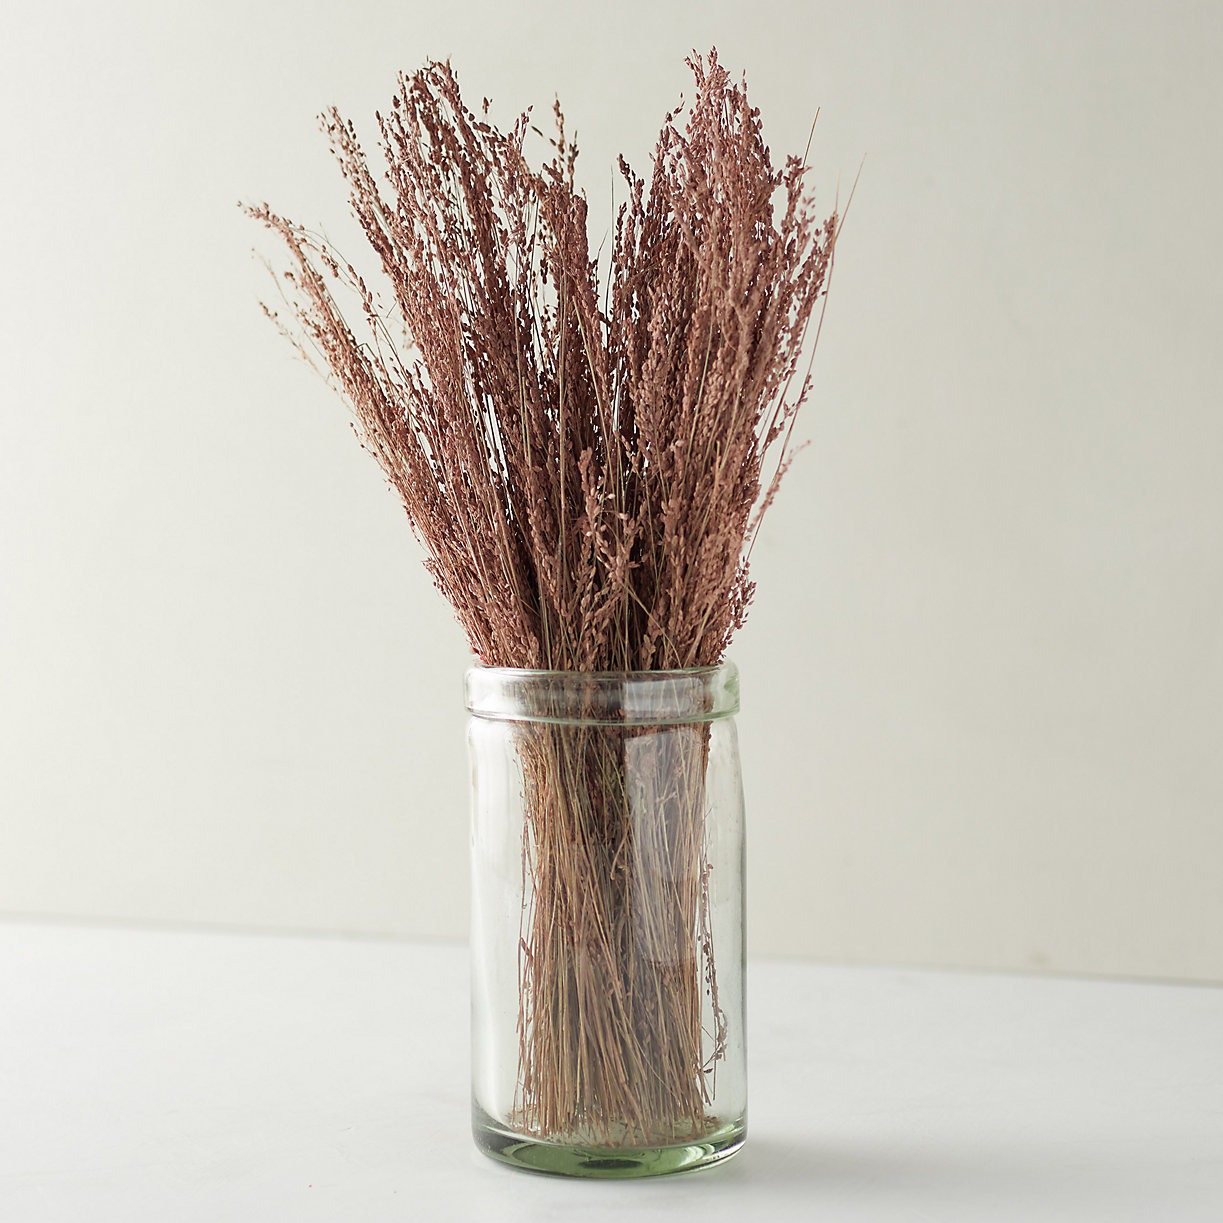 blush preserved star grass dried flowers bunch from Terrain